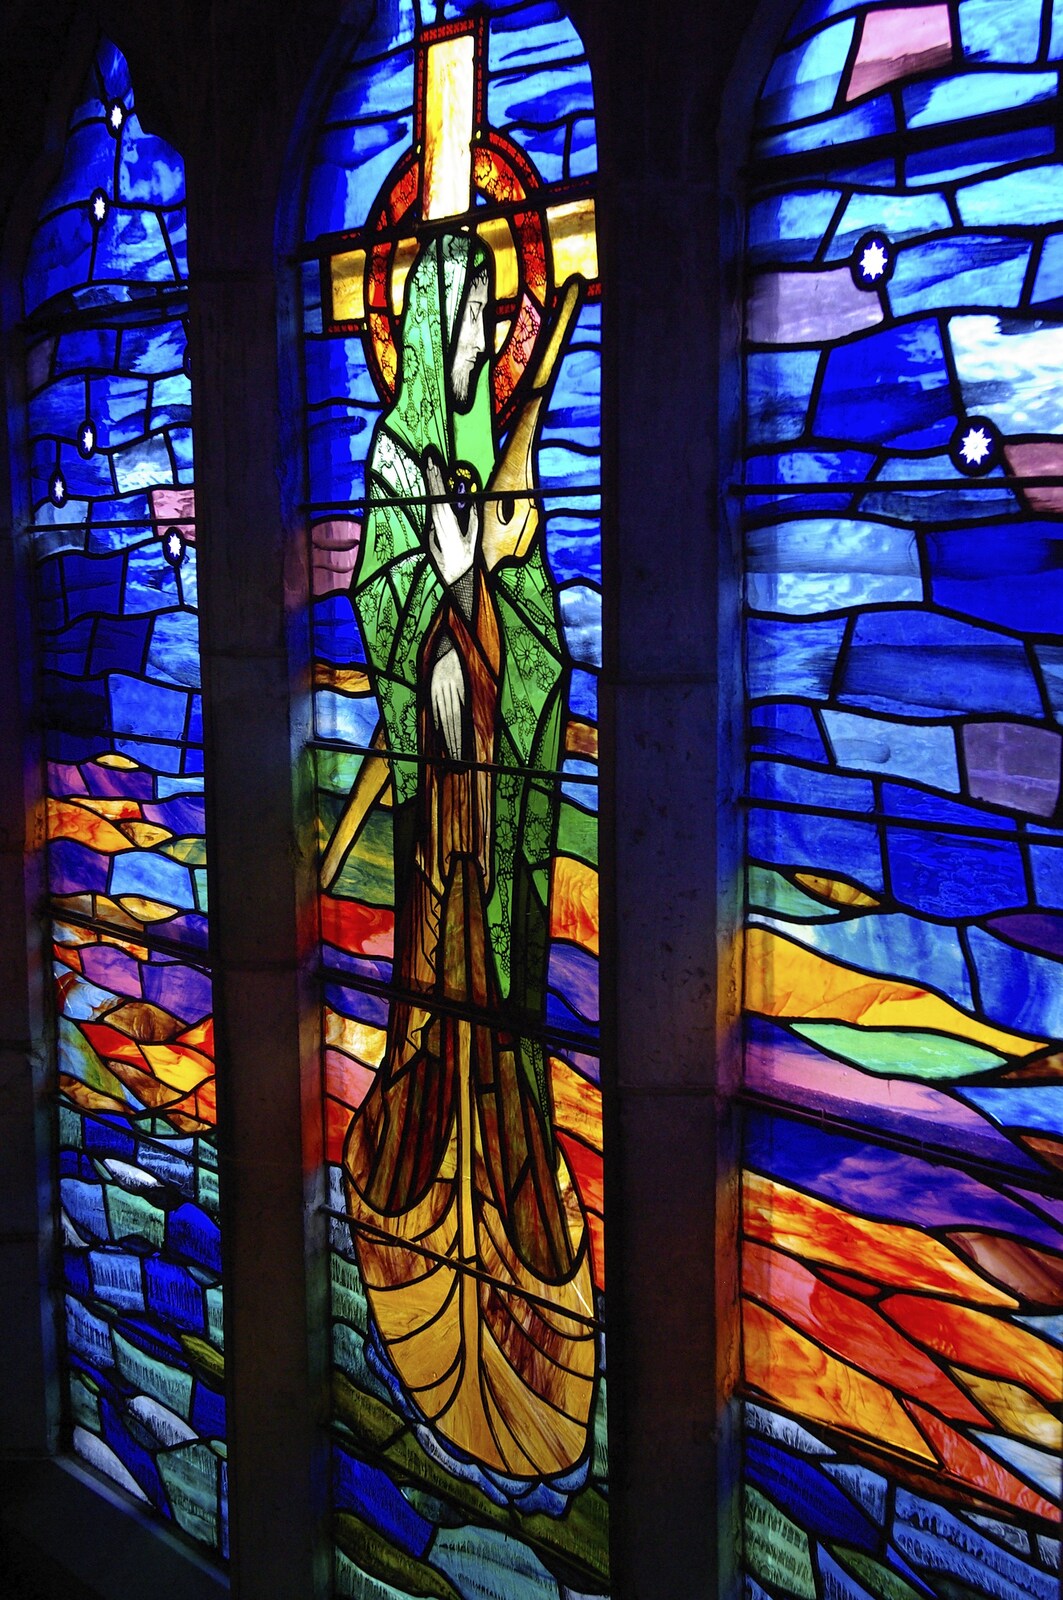 Paul and Jenny's Wedding, Tralee, County Kerry, Ireland - 3rd May 2008: The stained-glass window